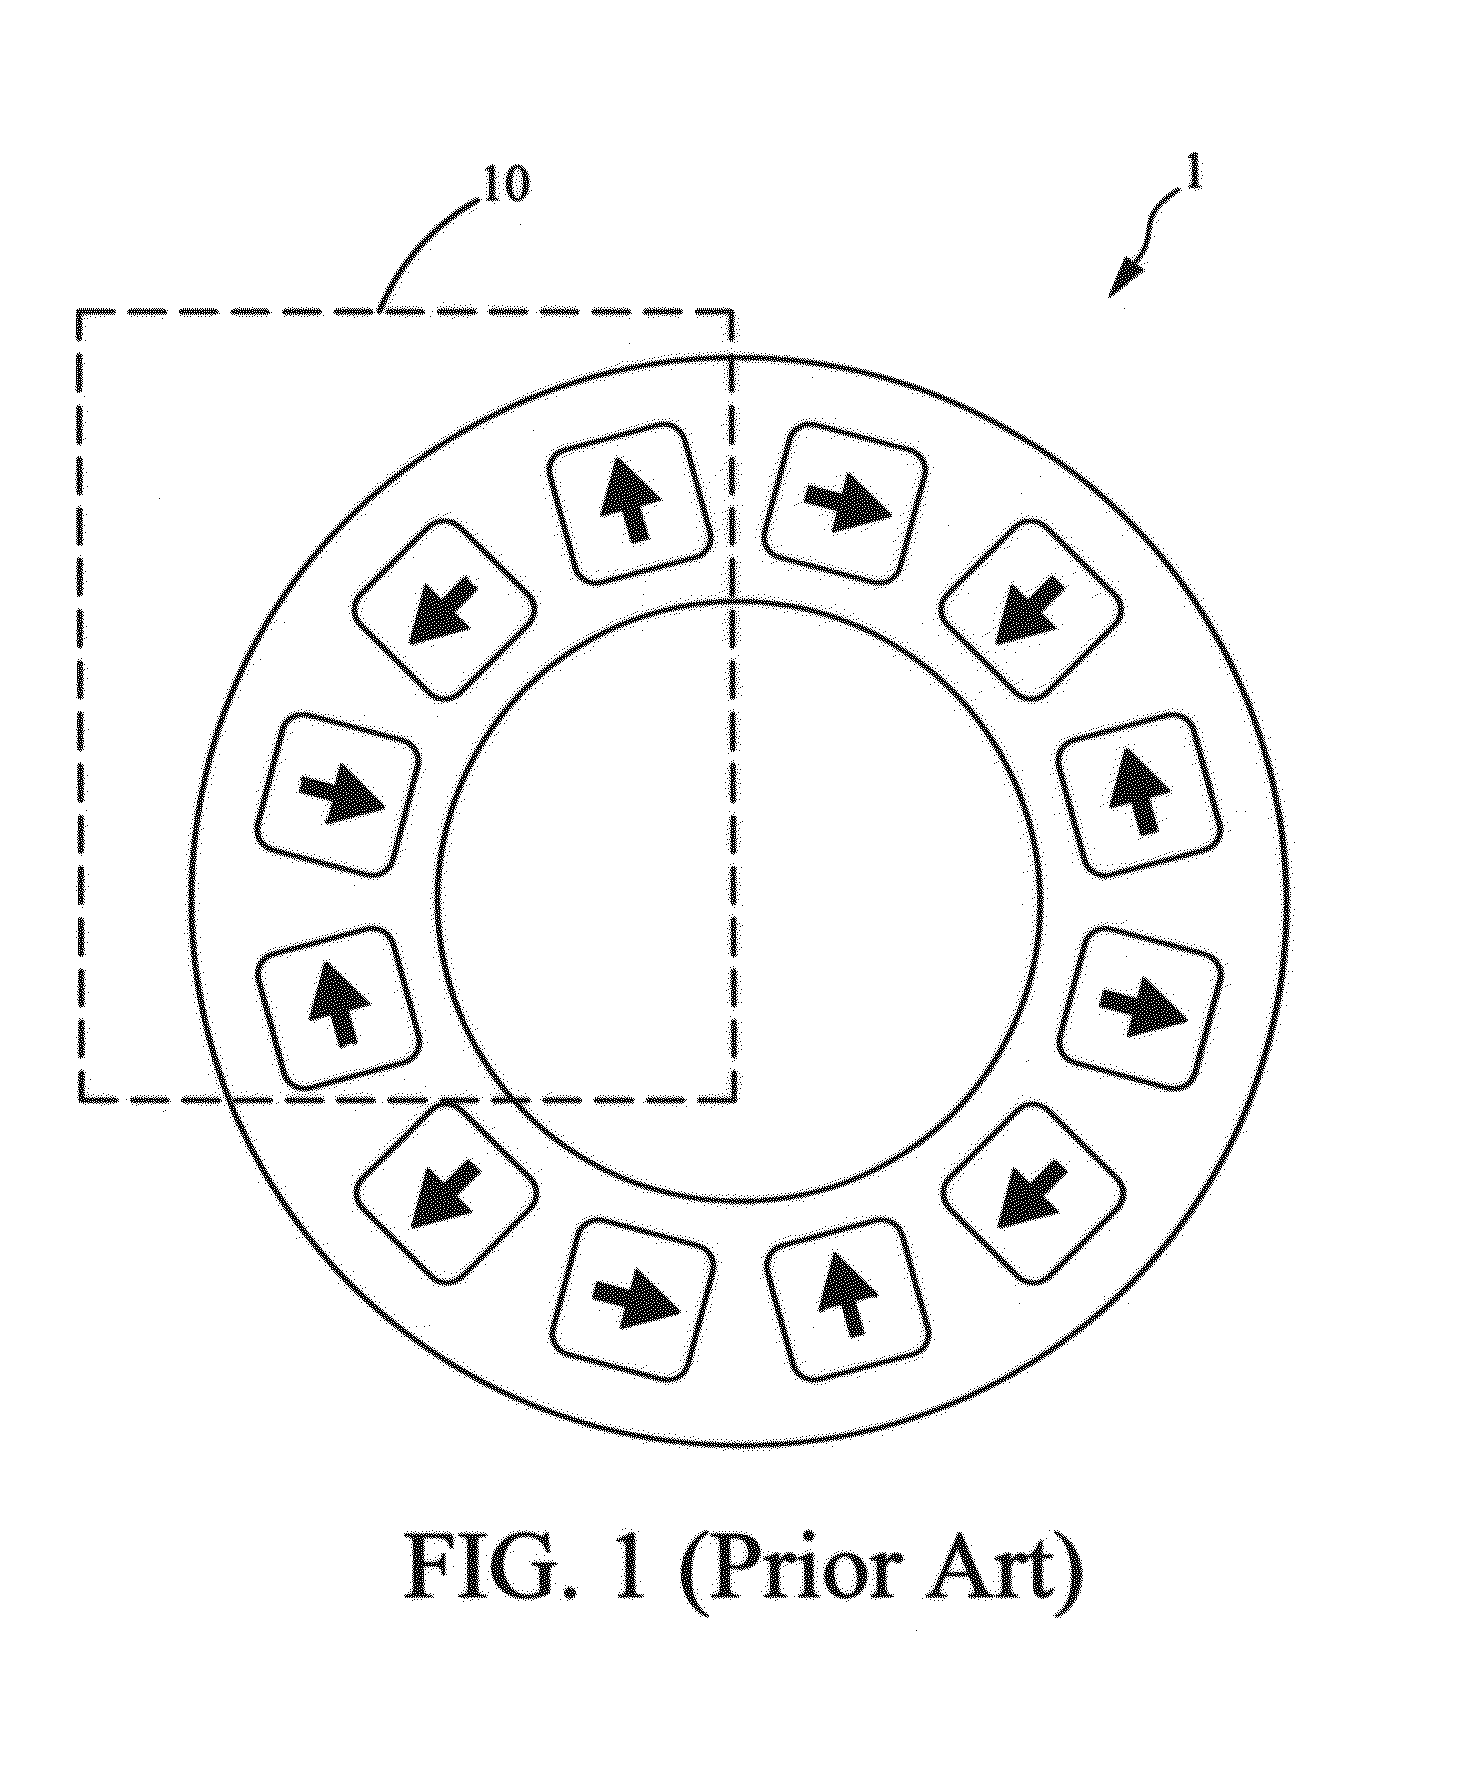 Magnetic modue of electron cyclotron resonance and electron cyclotron resonance apparatus using the same